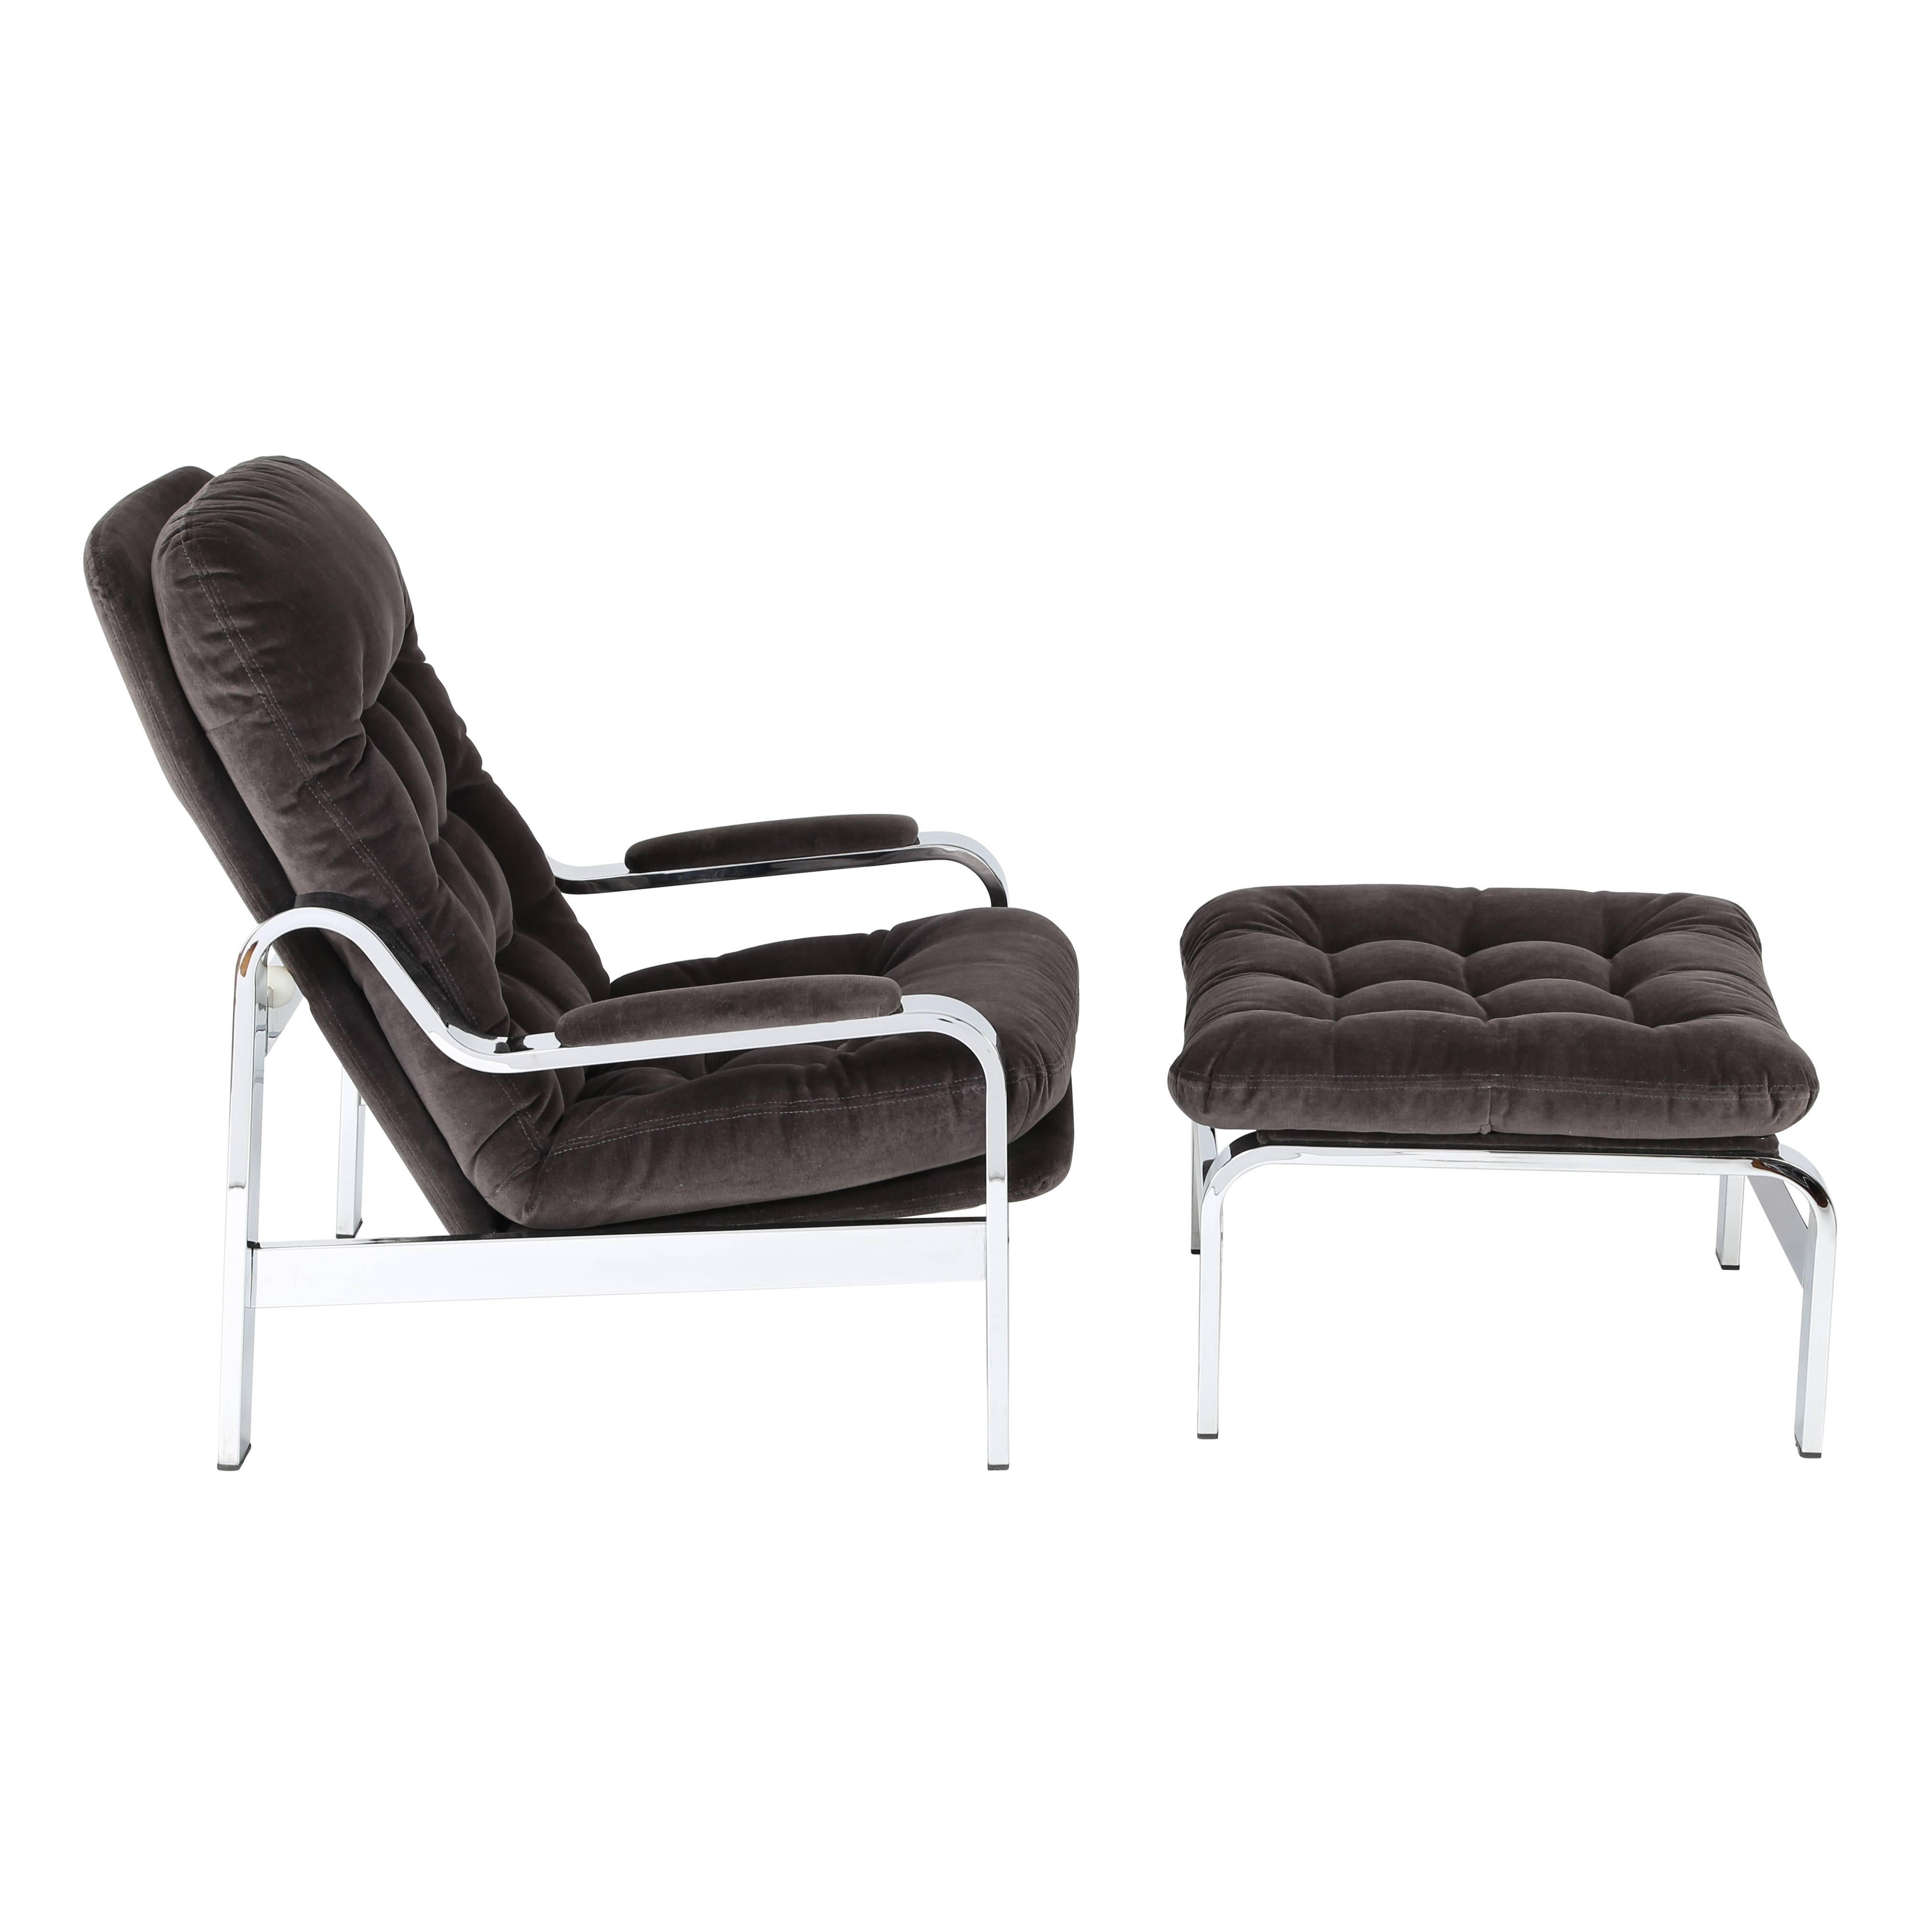 This extremely comfortable reclining armchair and ottoman are beautifully made with heavy, substantial chrome frames. The chair can smoothly slide back into a semi-reclined position. Newly reupholstered in a warm dark-grey cotton velvet. We do not